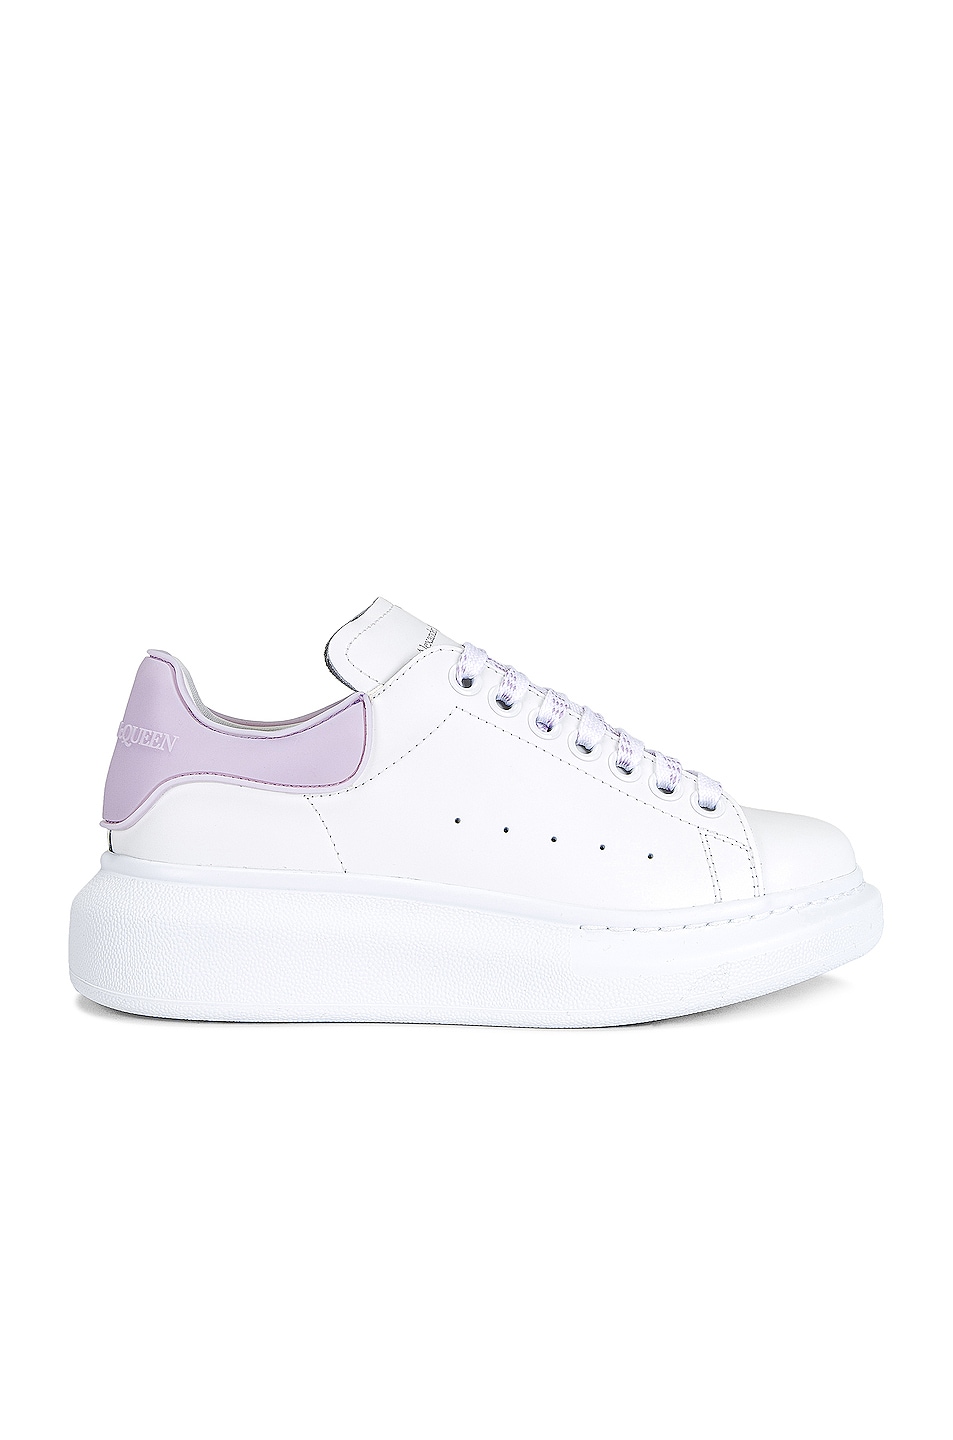 Image 1 of Alexander McQueen Oversized Sneakers in White & Lilac